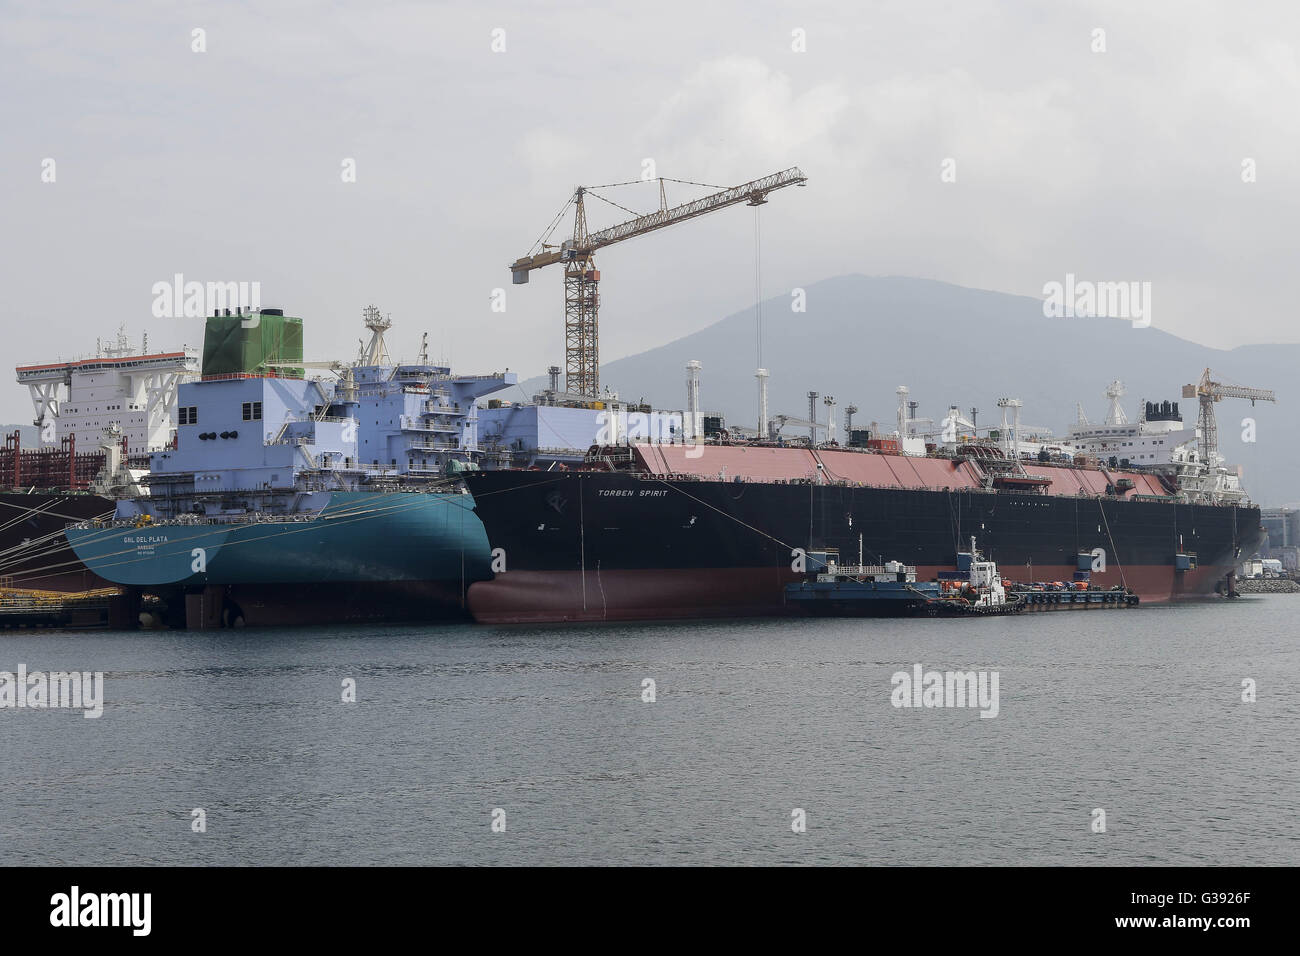 Geoje, Gyeongnam, South Korea. 7th June, 2016. Ships under construction sit moored at the DSME shipyard in Geoje, South Korea. Shipbuilding has been central to South Korea's economy since the 1970s. Ships accounted for 8.5 percent of the country's total exports through June 20 of October 2015, according to the trade ministry. After more than a decade of global dominance, South Korea's shipbuilders face an unprecedented crisis that threatens the very survival of one of the flagship industries of Asia's fourth largest economy. Major South Korean shipbuilders plan to restructure their operations Stock Photo